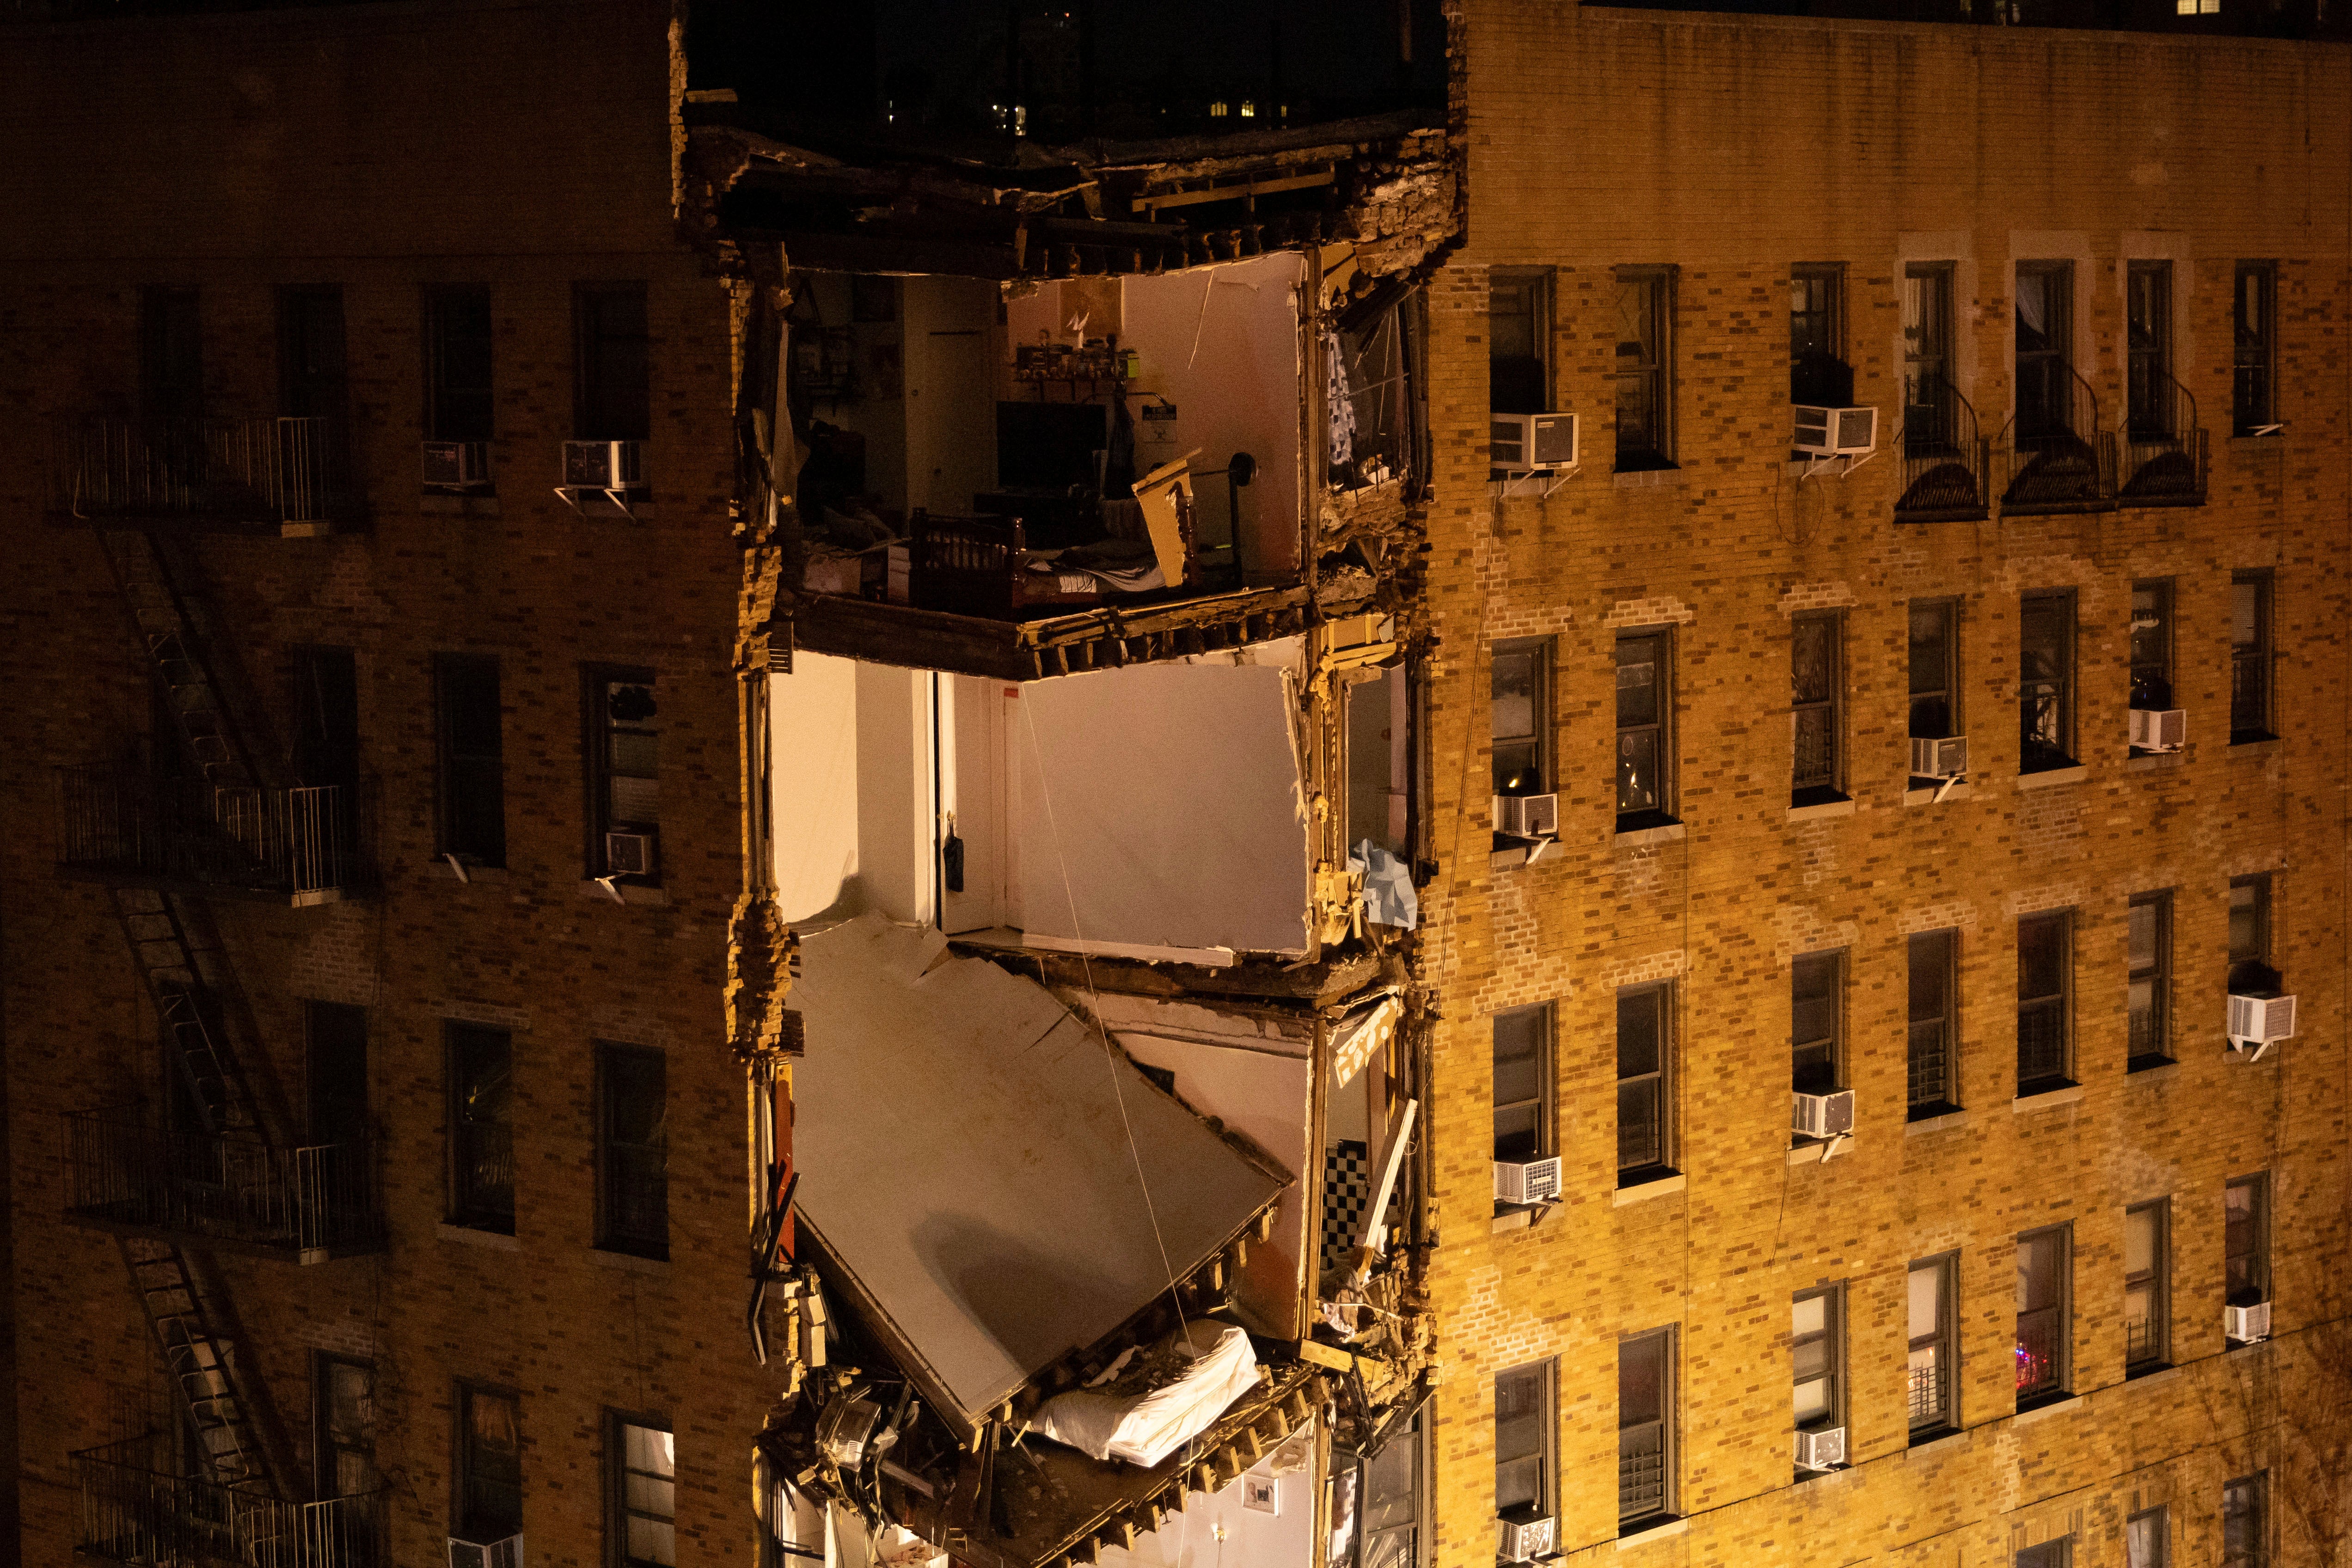 Apartments were left exposed after the collapse